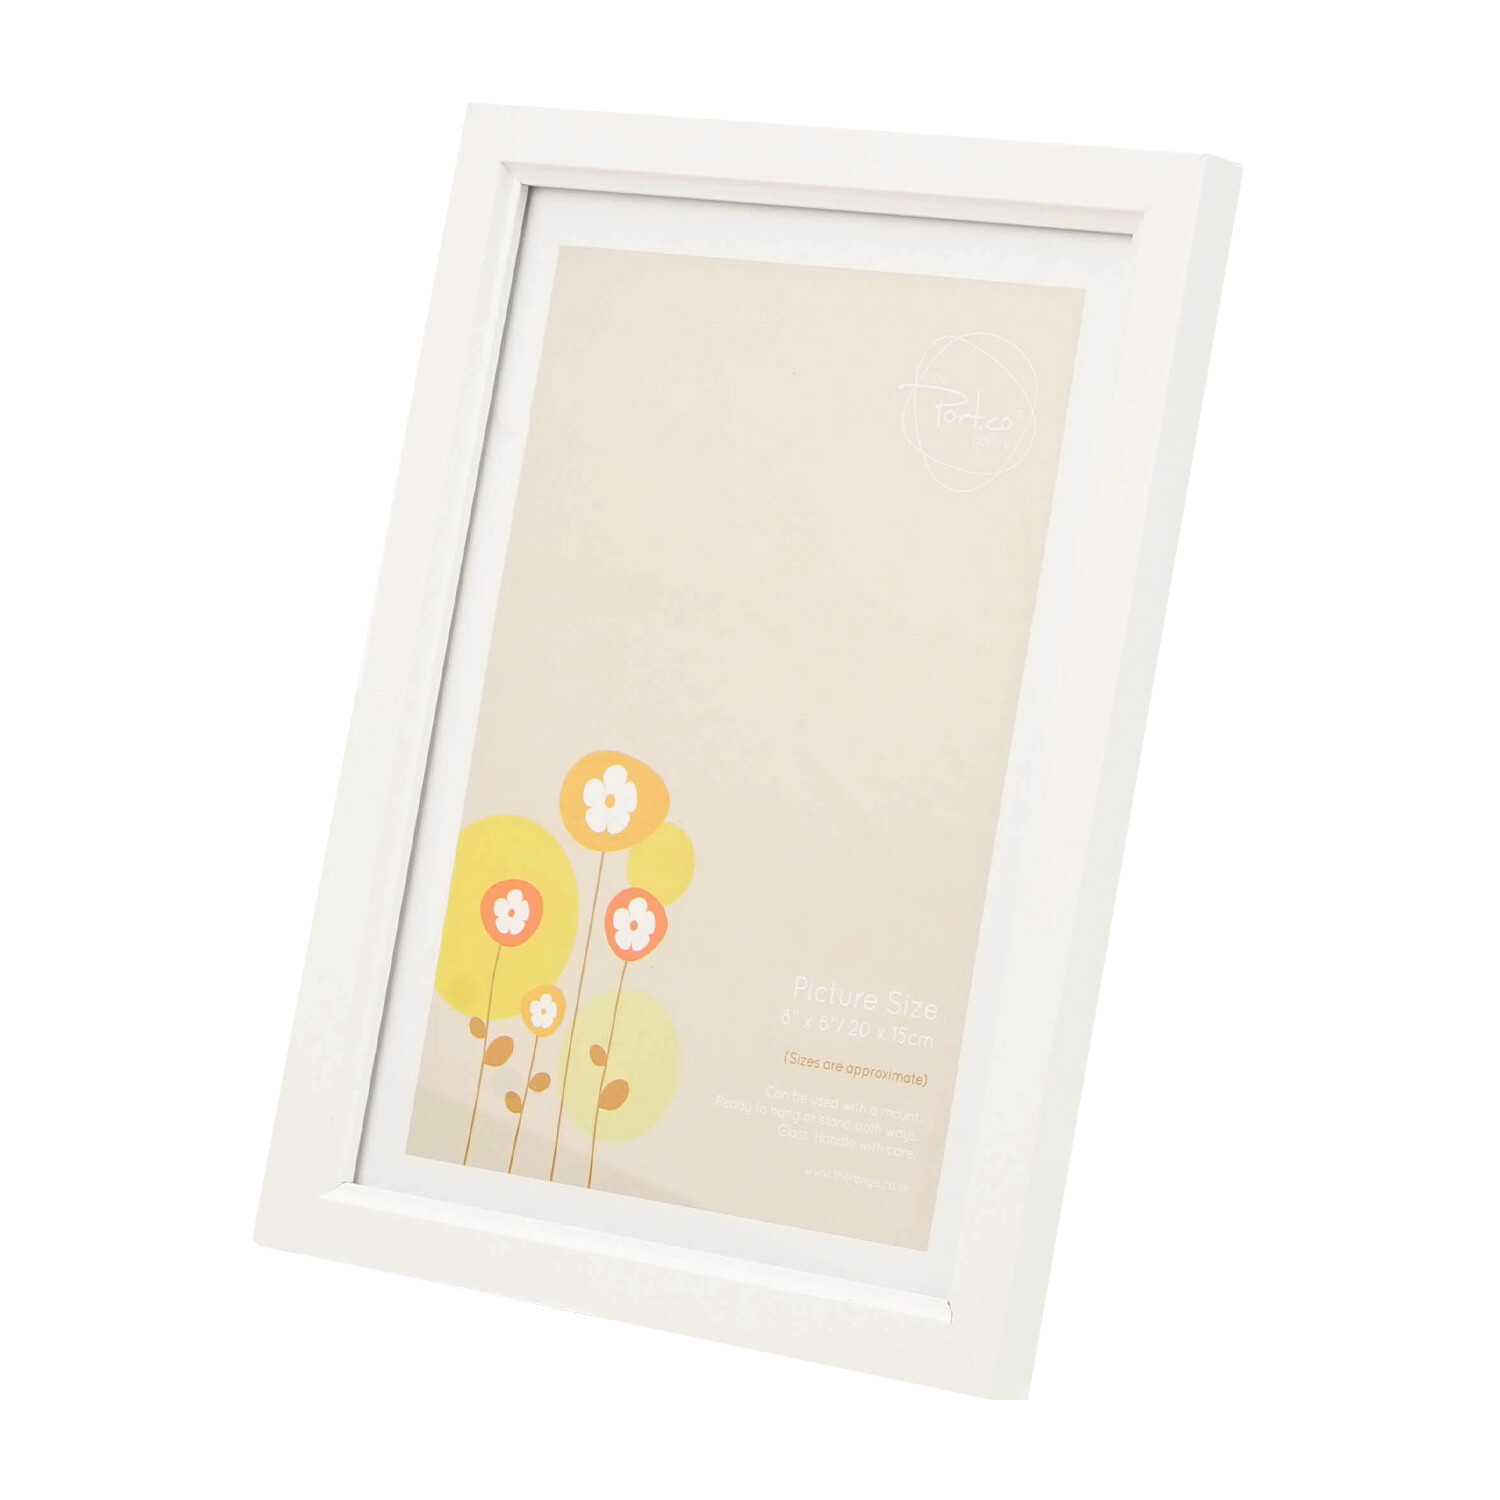 The Port. Co Gallery Ridged White Photo Frame 8 x 6 inch Image 2